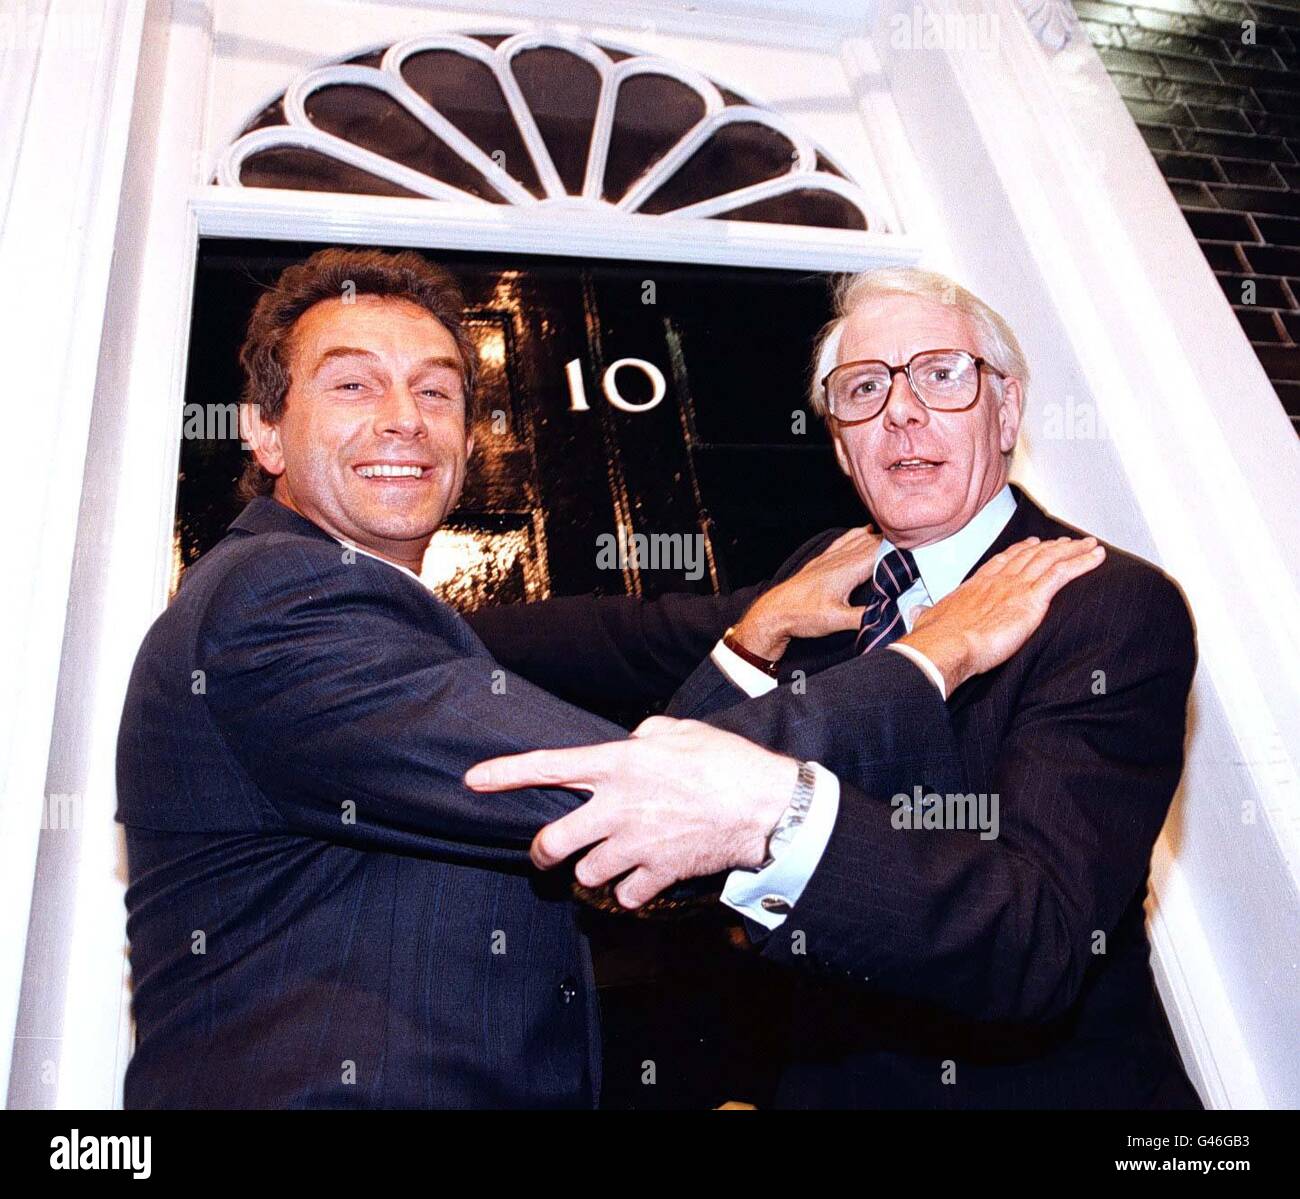 The struggle for Number 10 Downing Street intensifies, with look-a-likes John Major (right, Peter Friel) and Tony Blair (Michael Aidan Ross) getting to grips on the Granada TV Studio Tours Downing Street set in Manchester today (Monday). Pic Dave Kendall. Stock Photo